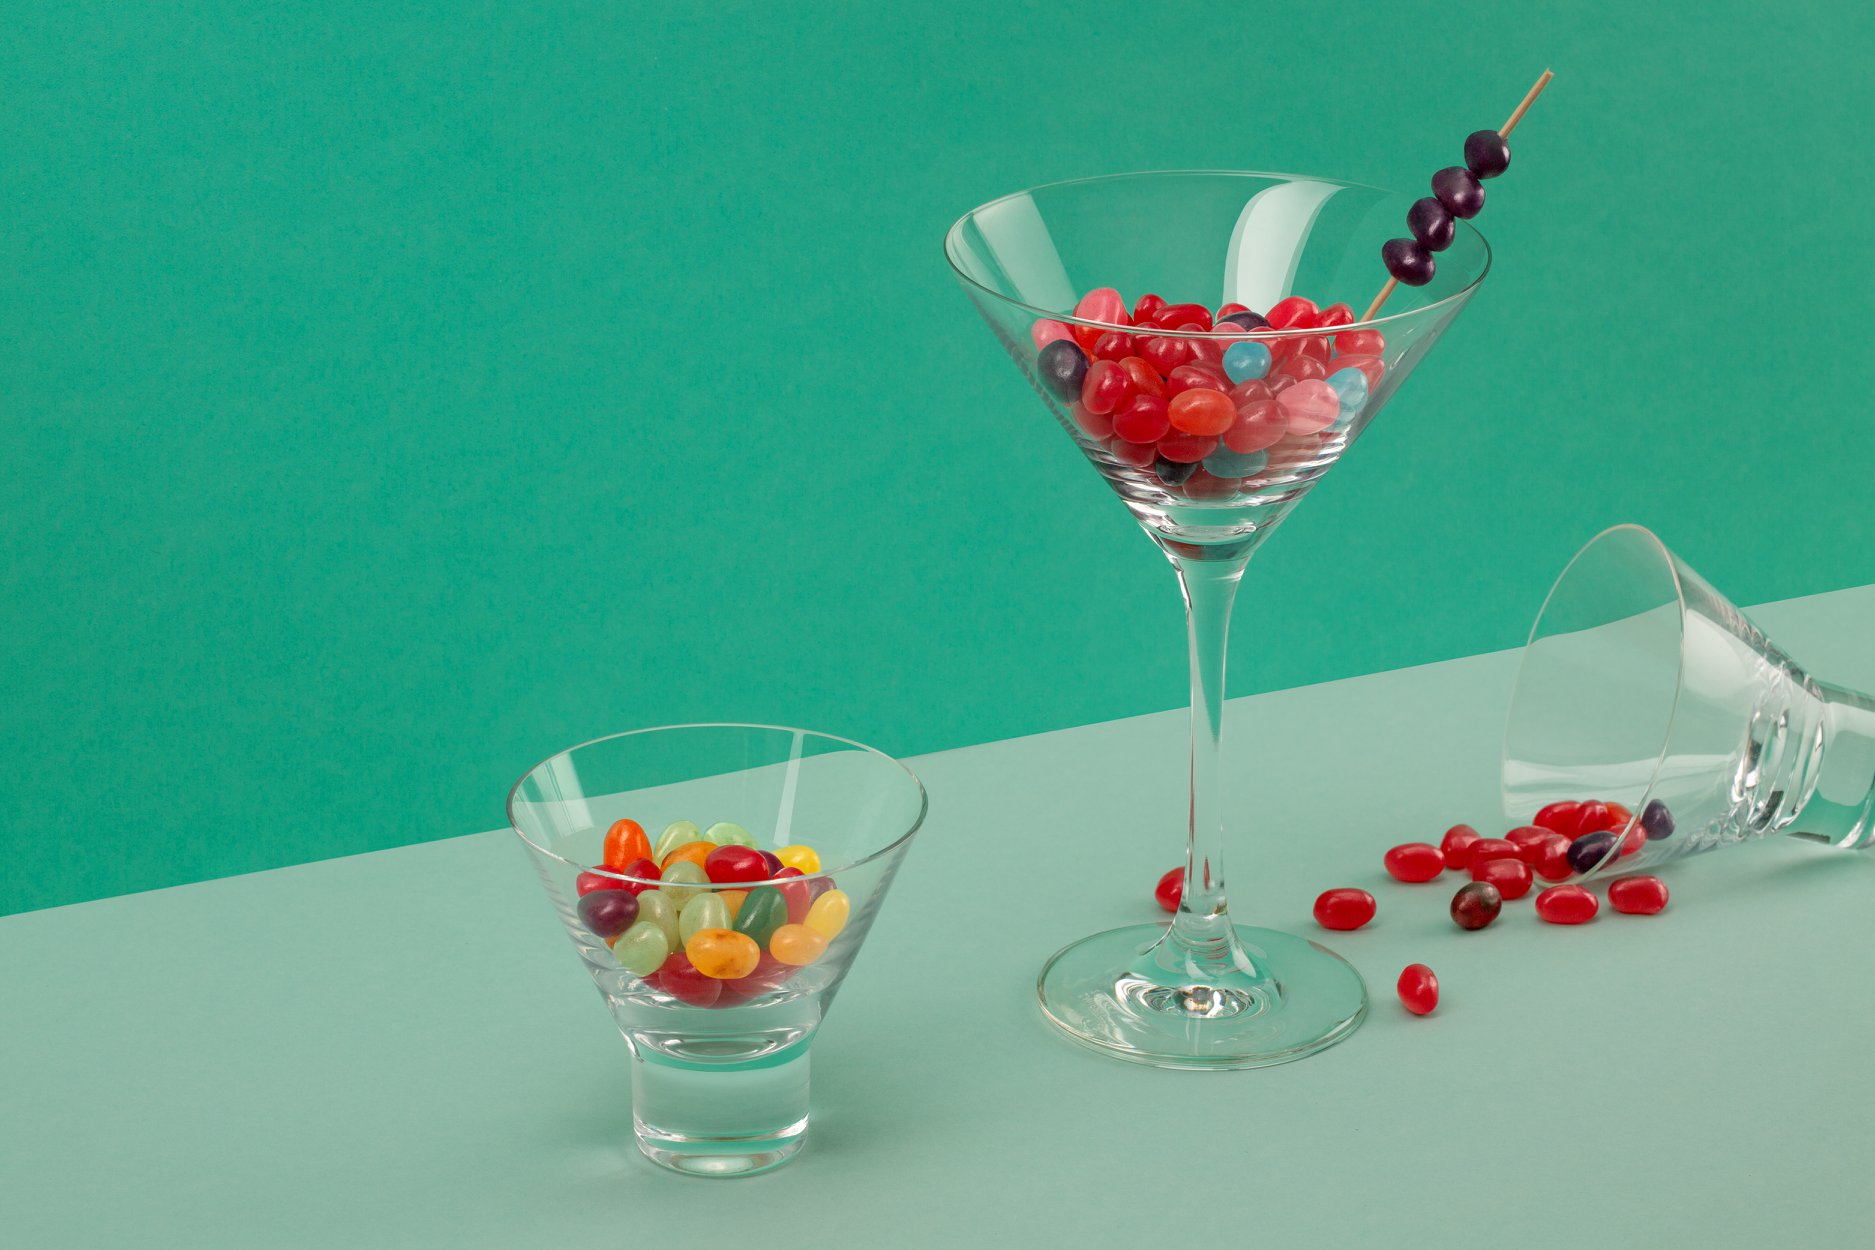 jellybeans in a cocktail glass.